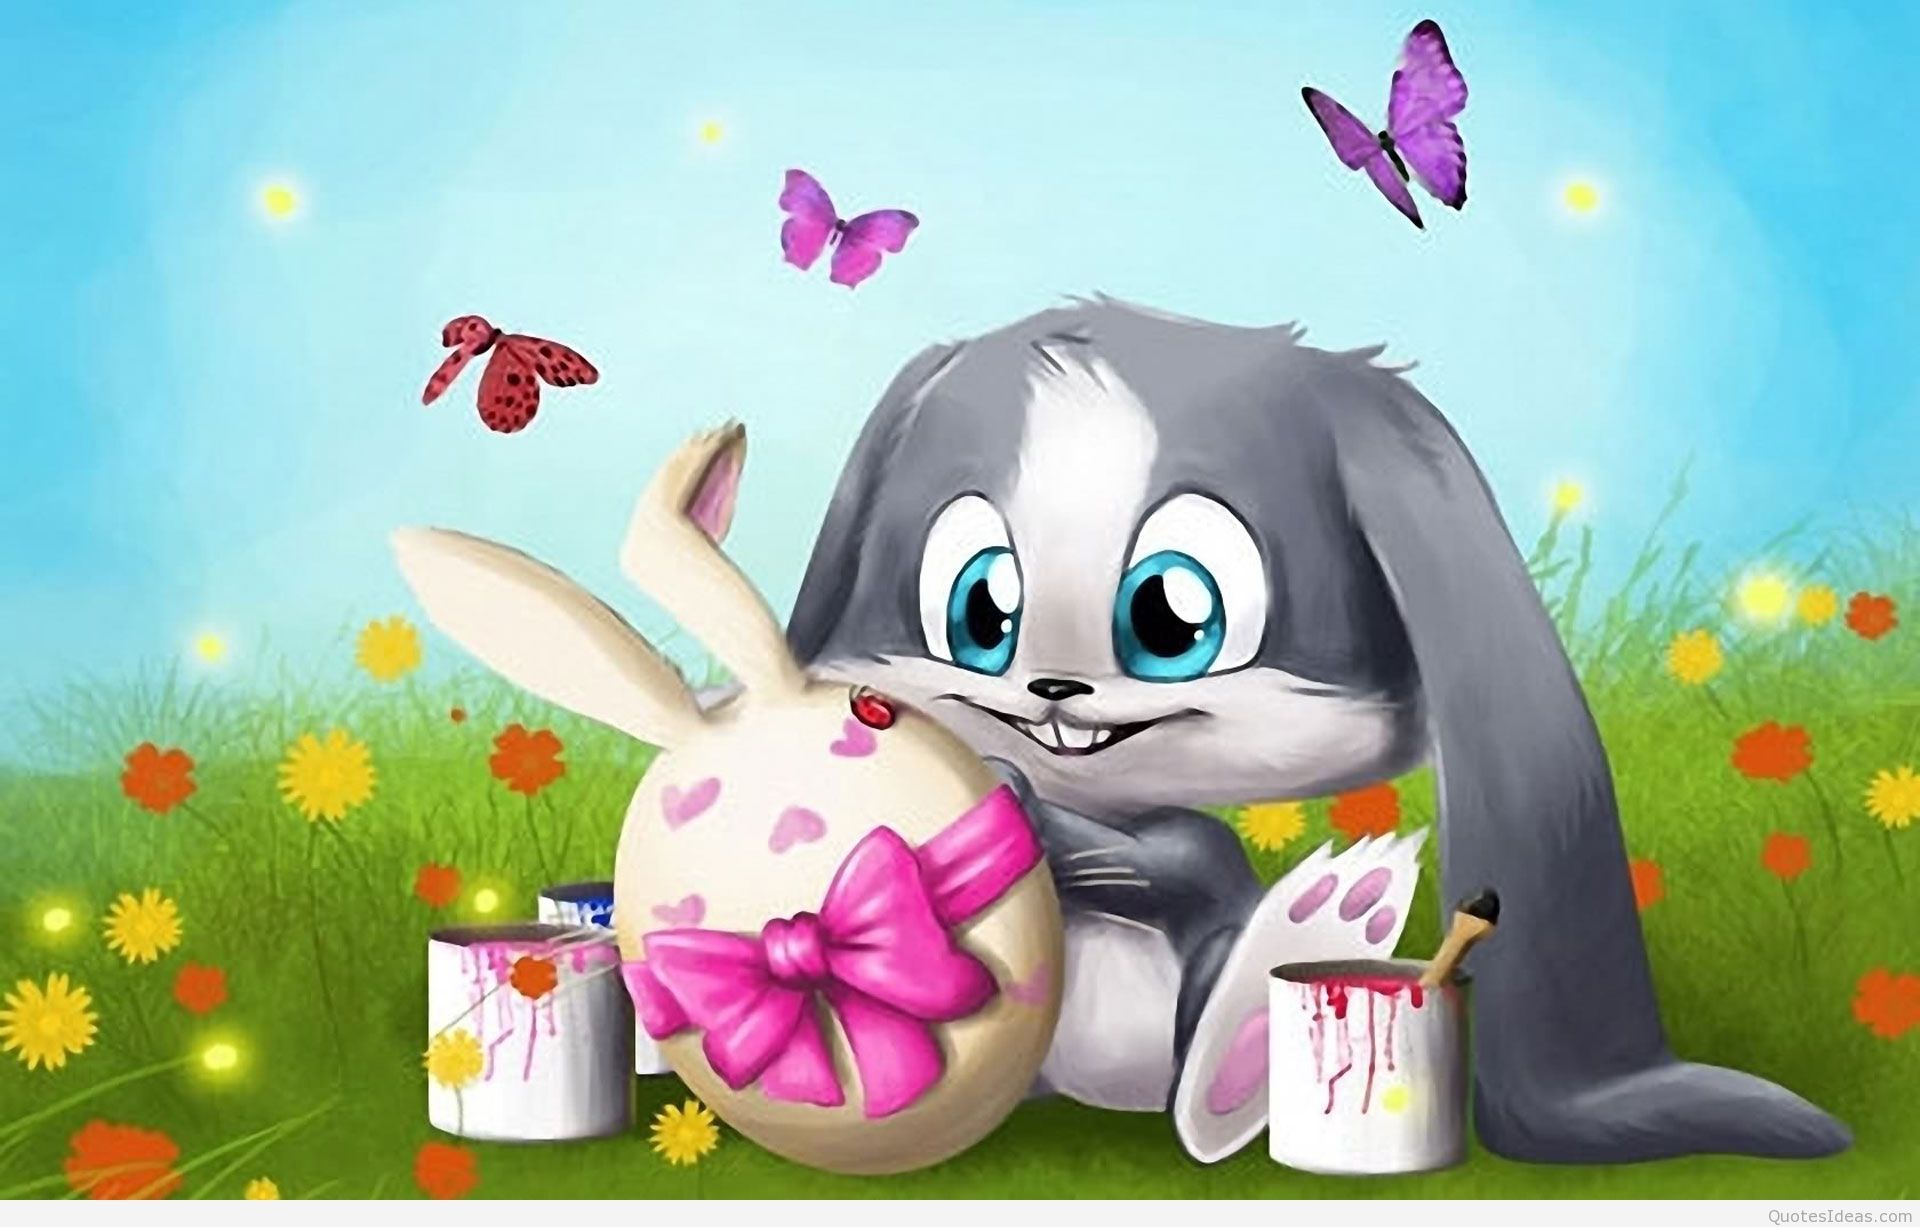 Happy Easter bunny wallpaper and quotes